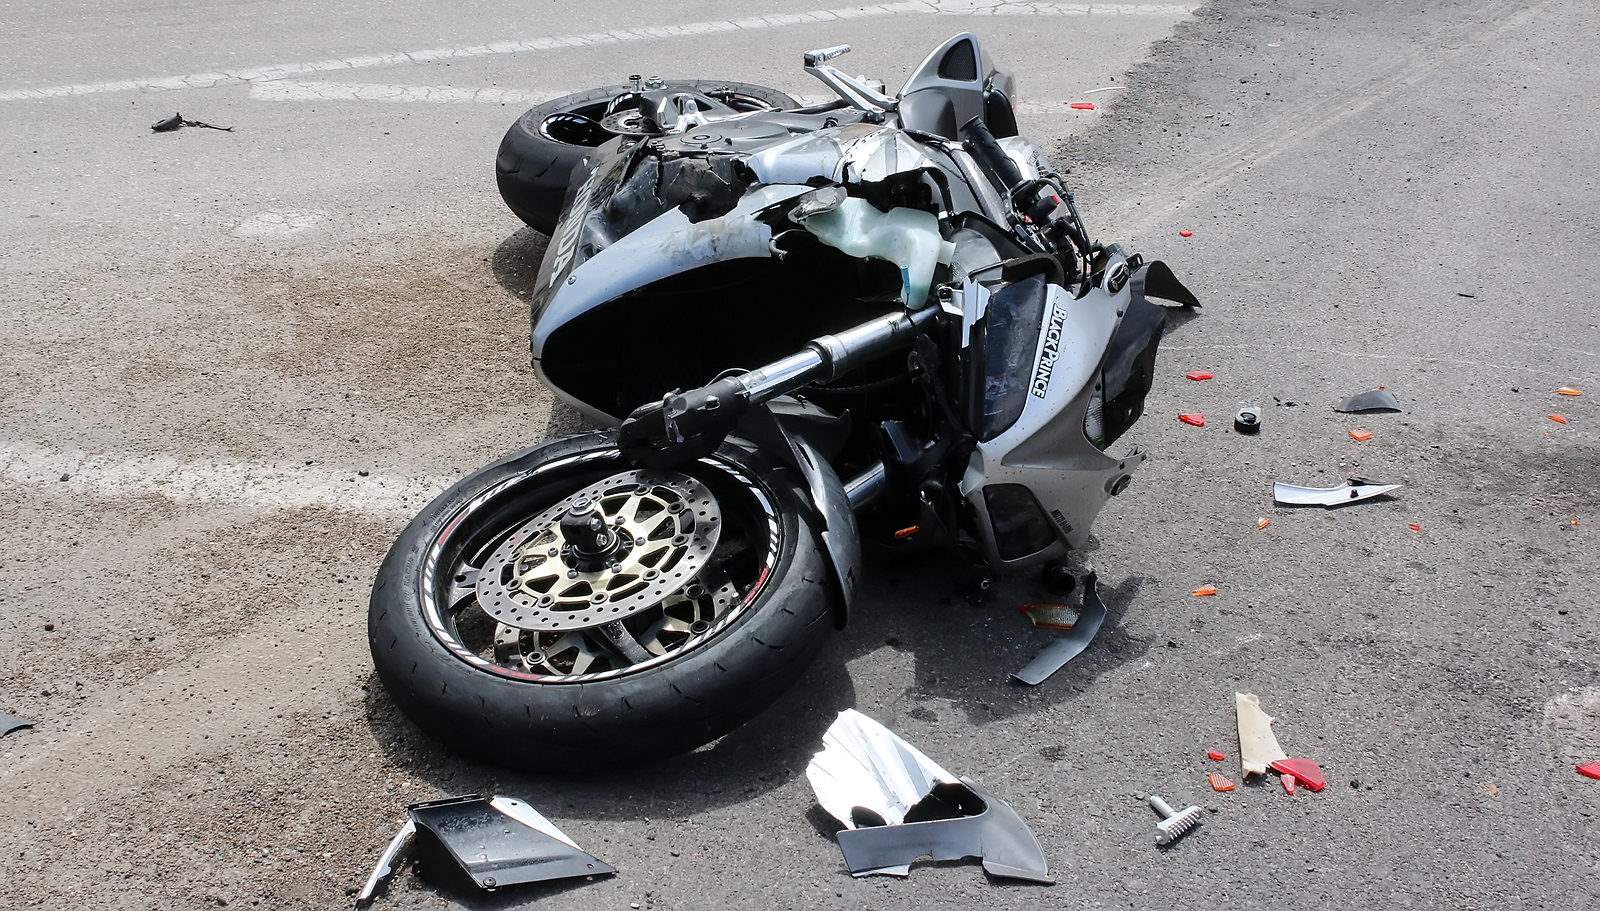 sports motorcycle lays on a road after an accident